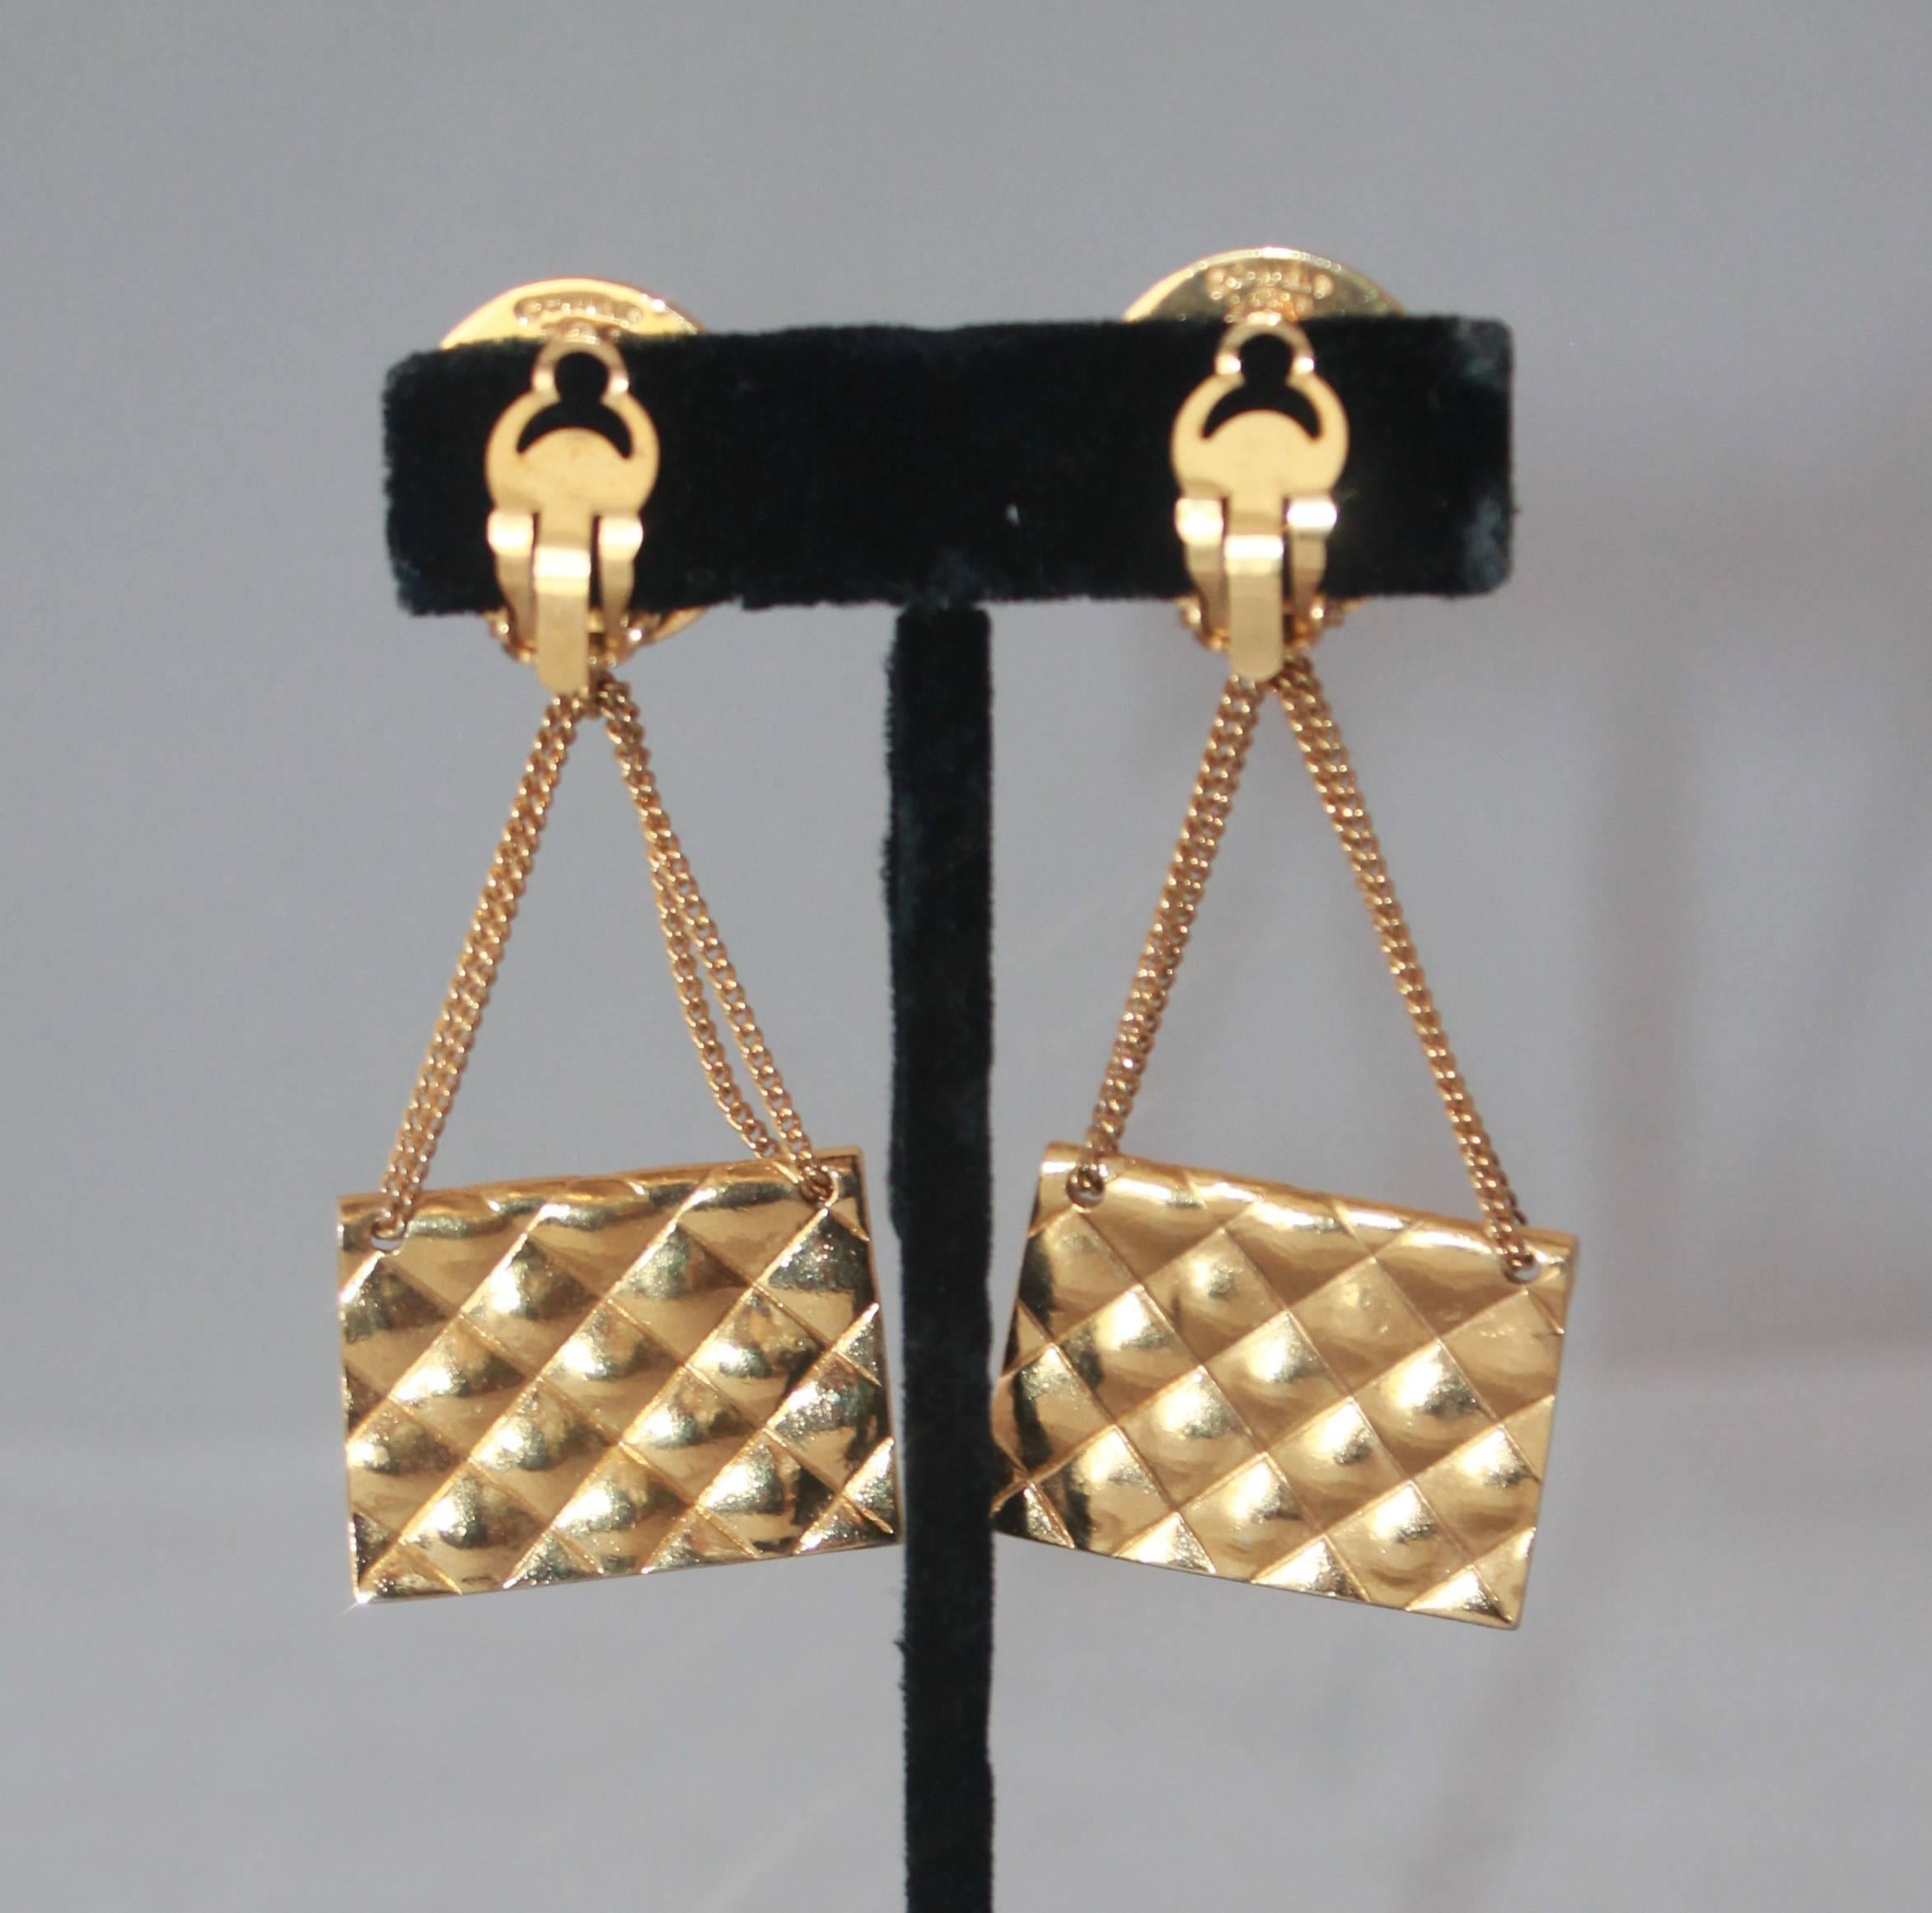 Chanel 1989 Vintage Goldtone Handbag Clip-On Earrings. These earrings are in excellent vintage condition and feature a quilted Chanel Handbag with a Chanel medallion on the top. 

Measurements:
Length- 3